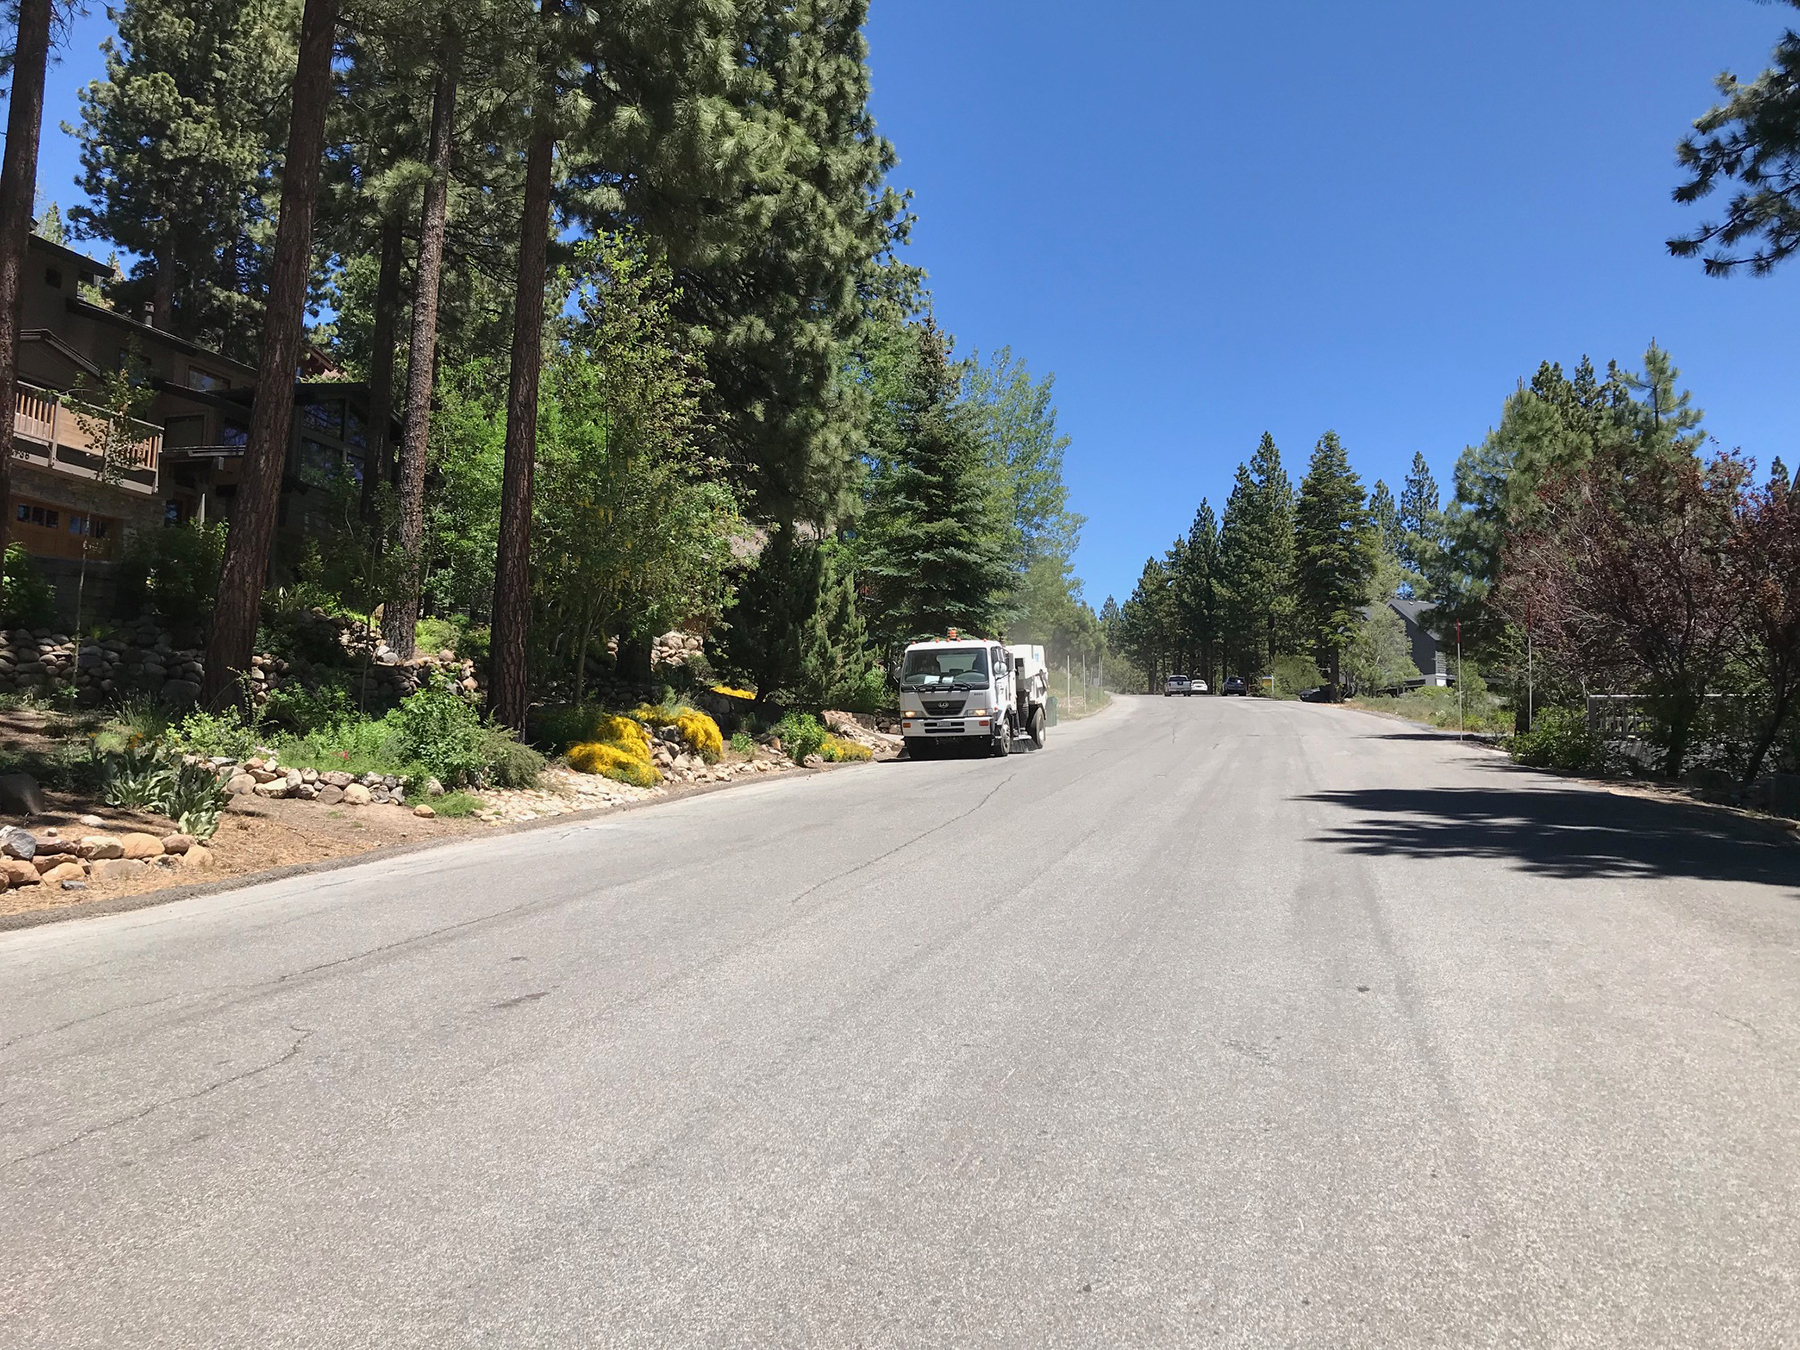 Routine sweeping of roadways has helped reduce fine sediment particle loadings to Lake Tahoe considerably. (Photograph courtesy of Washoe County, Nevada) 